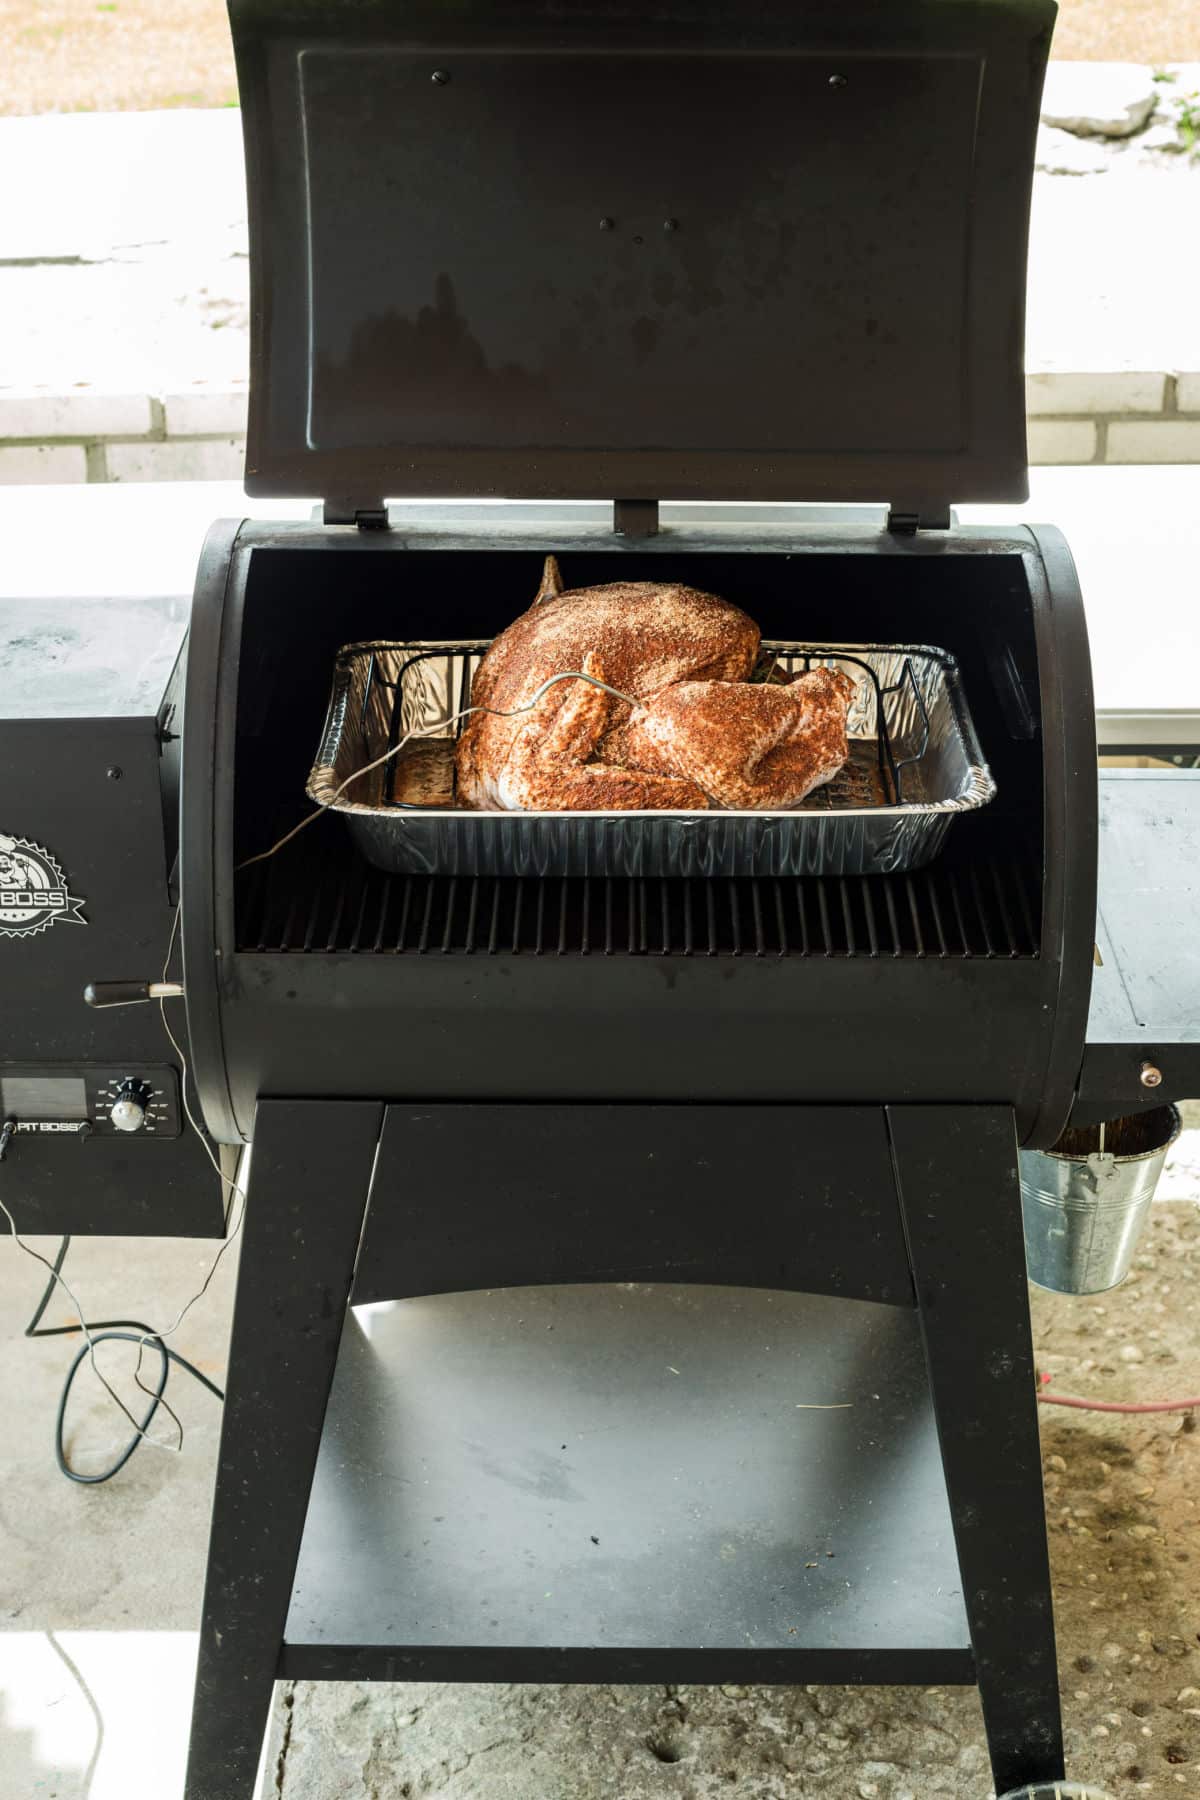 A turkey about to be smoked on a pellet grill.